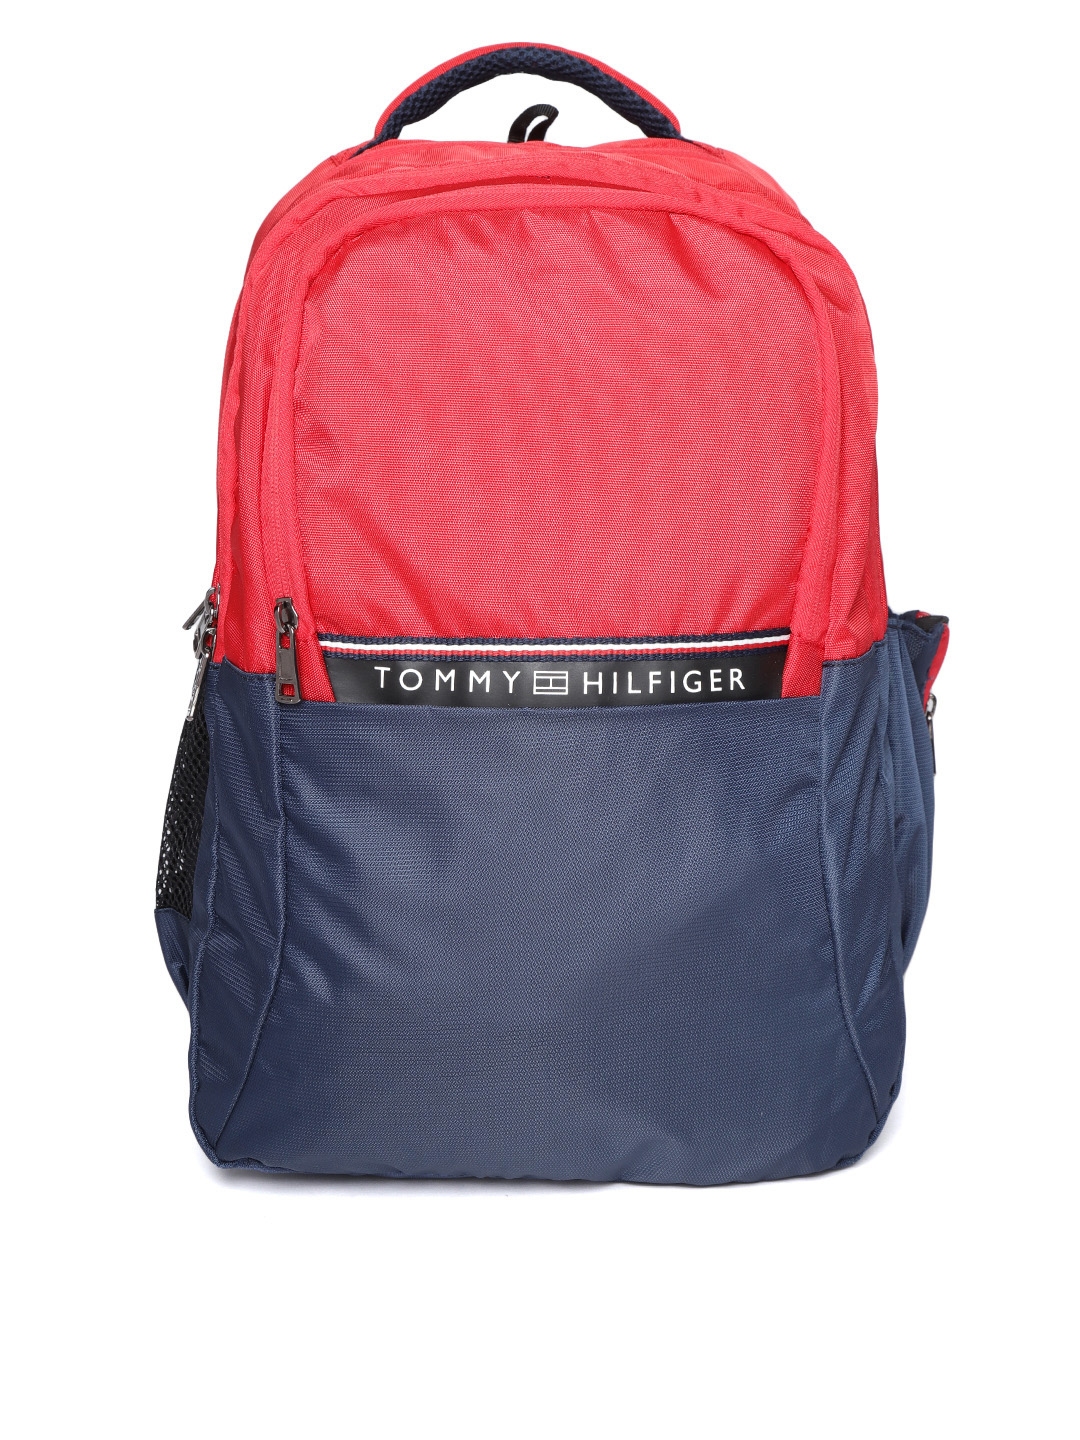 Buy Tommy Hilfiger Unisex Red & Navy Blue Colourblocked Backpack